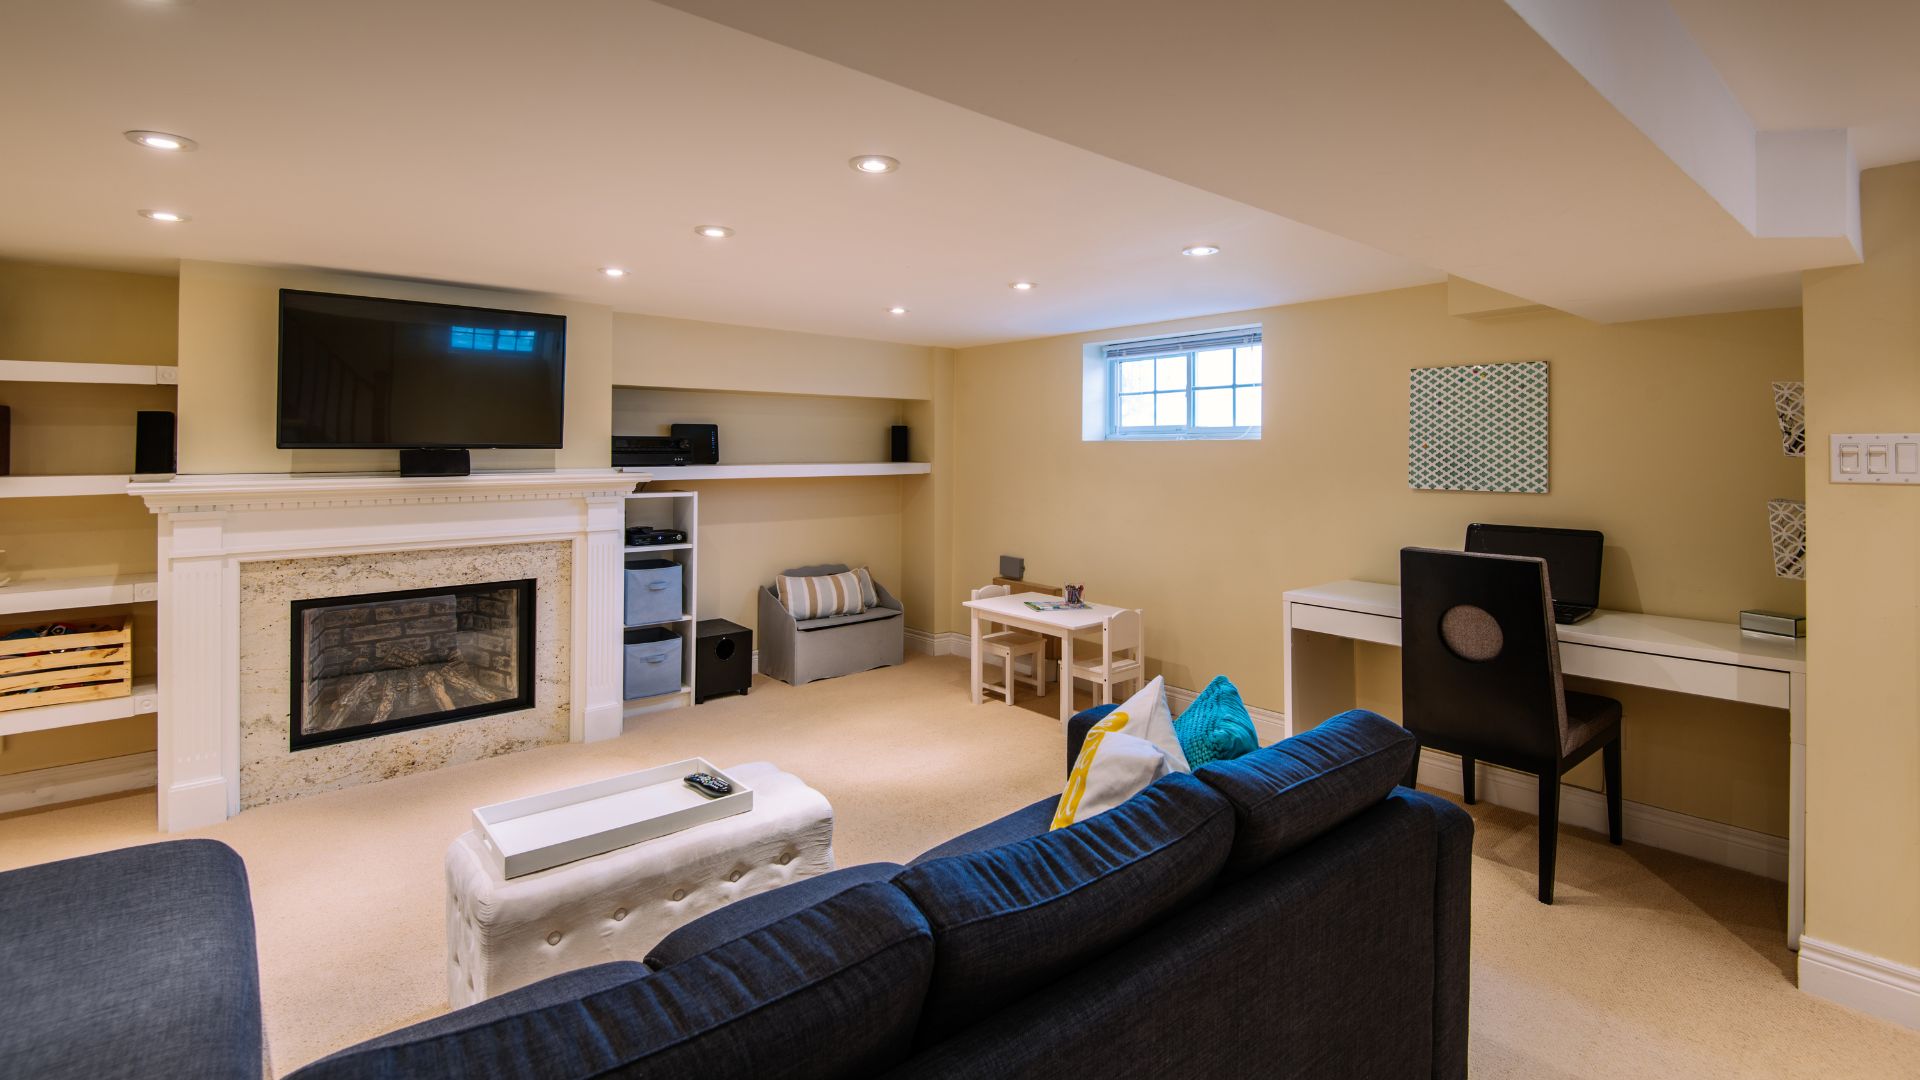 Living room in basement with fireplace, television, with yellow walls and flooring